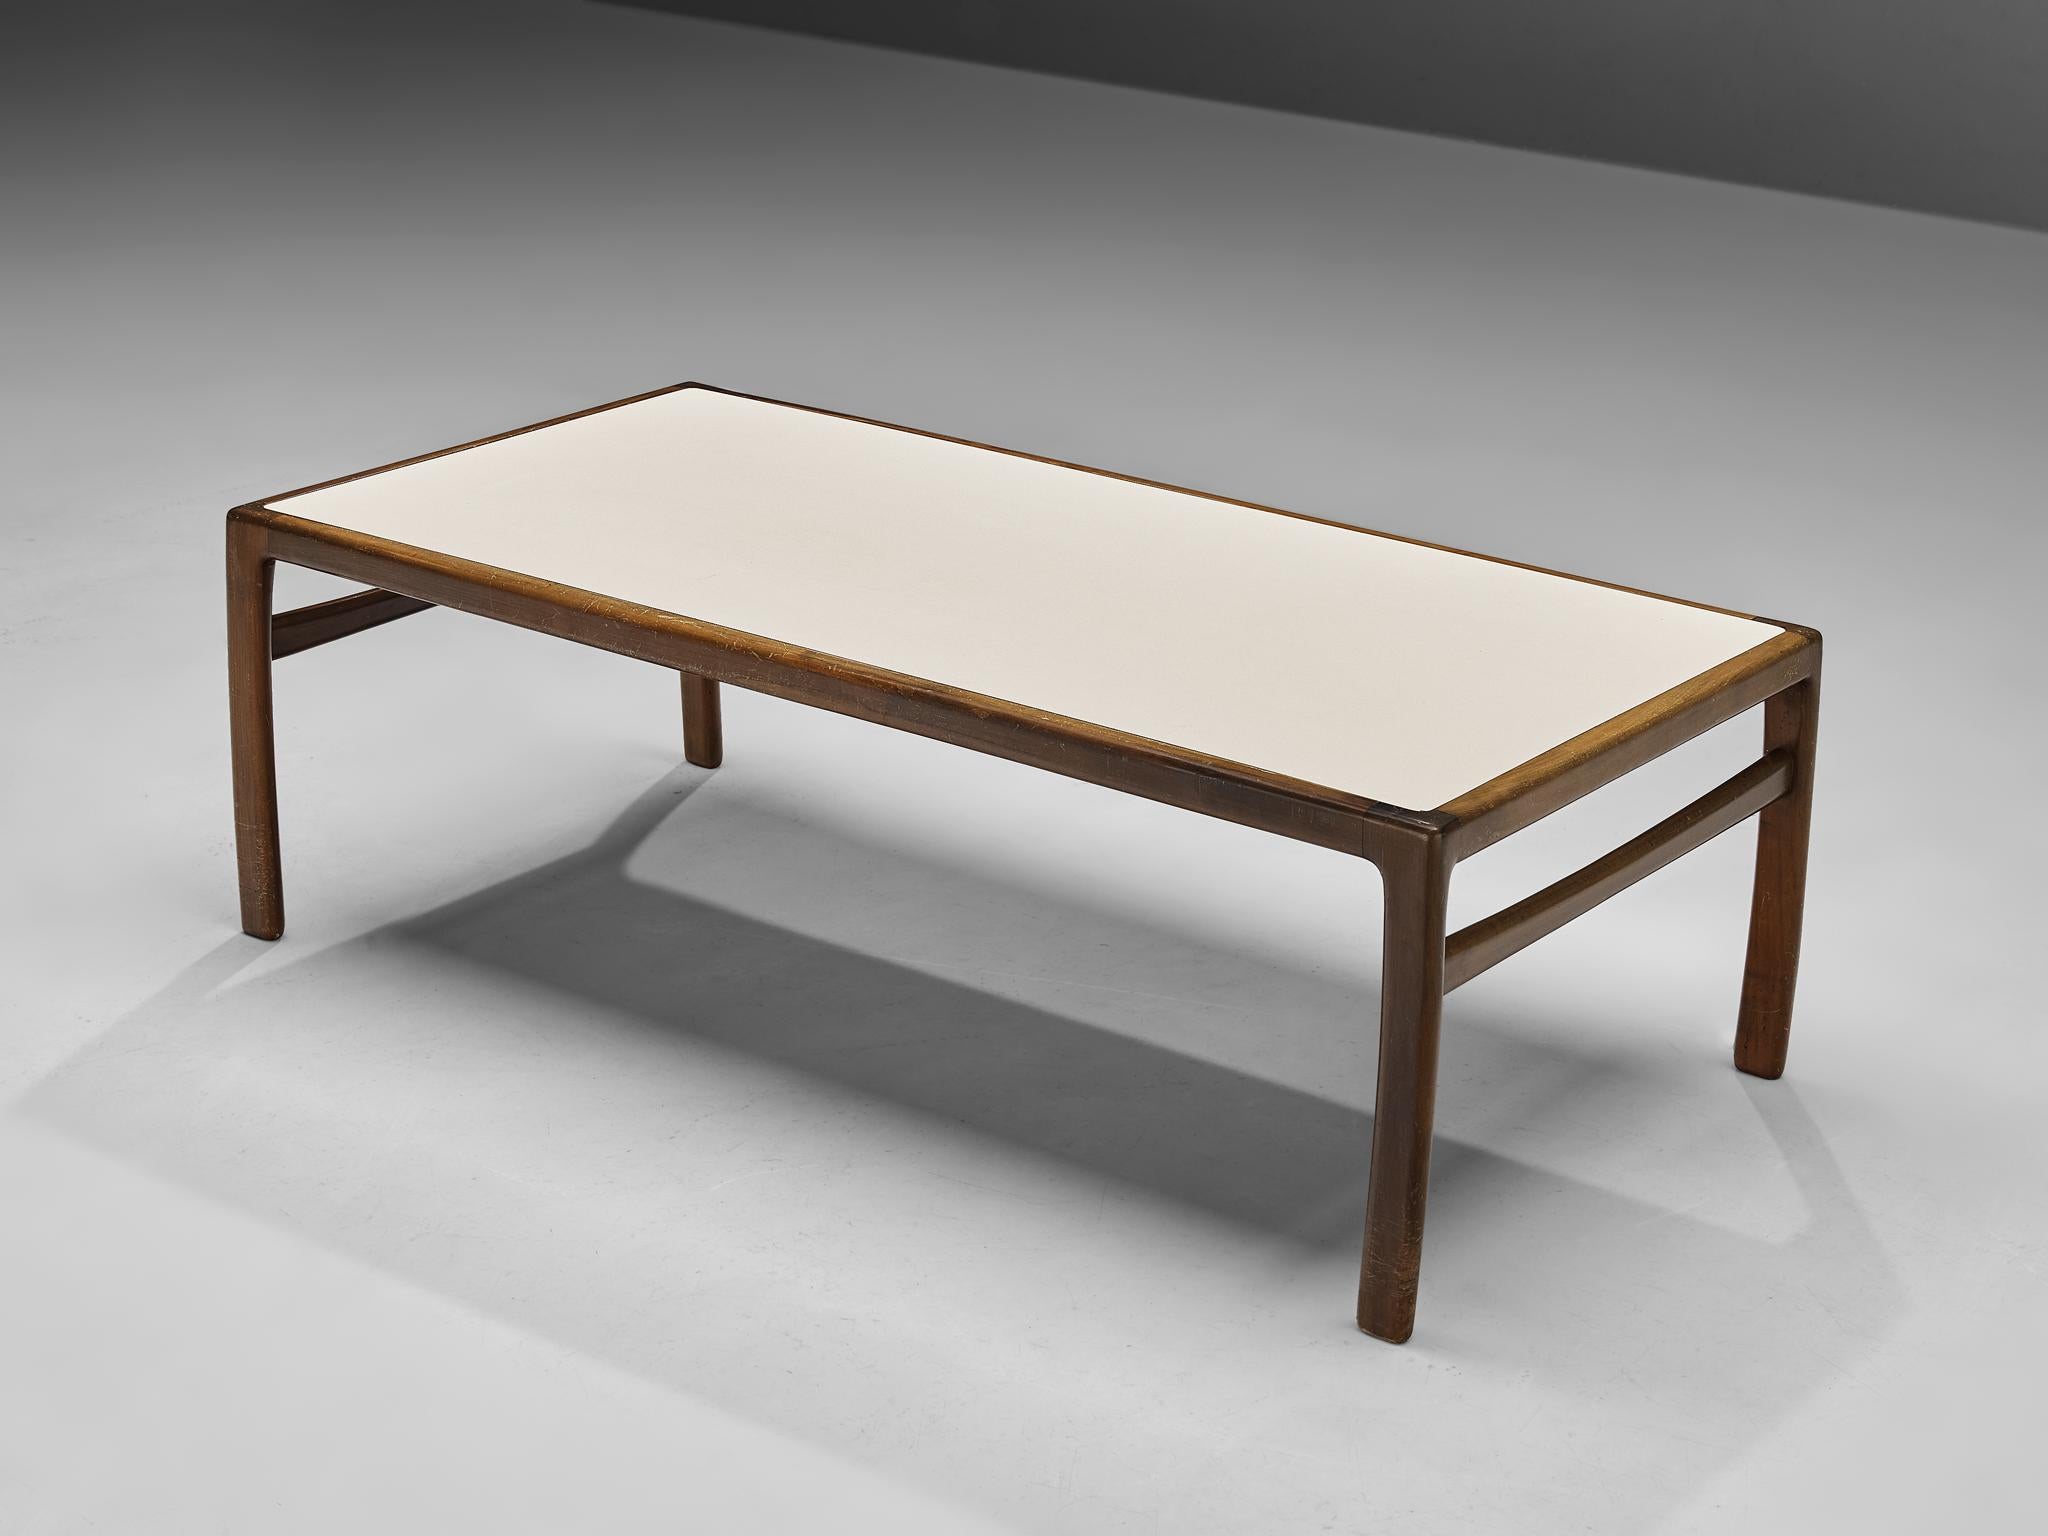 Coffee table, walnut, laminated wood, Denmark, 1960s

This coffee table contains a white high-gloss laminated top, a solid walnut frame and fully resembles designs of the Danish designer Tue Poulsen. The white color of the table top creates a vivid